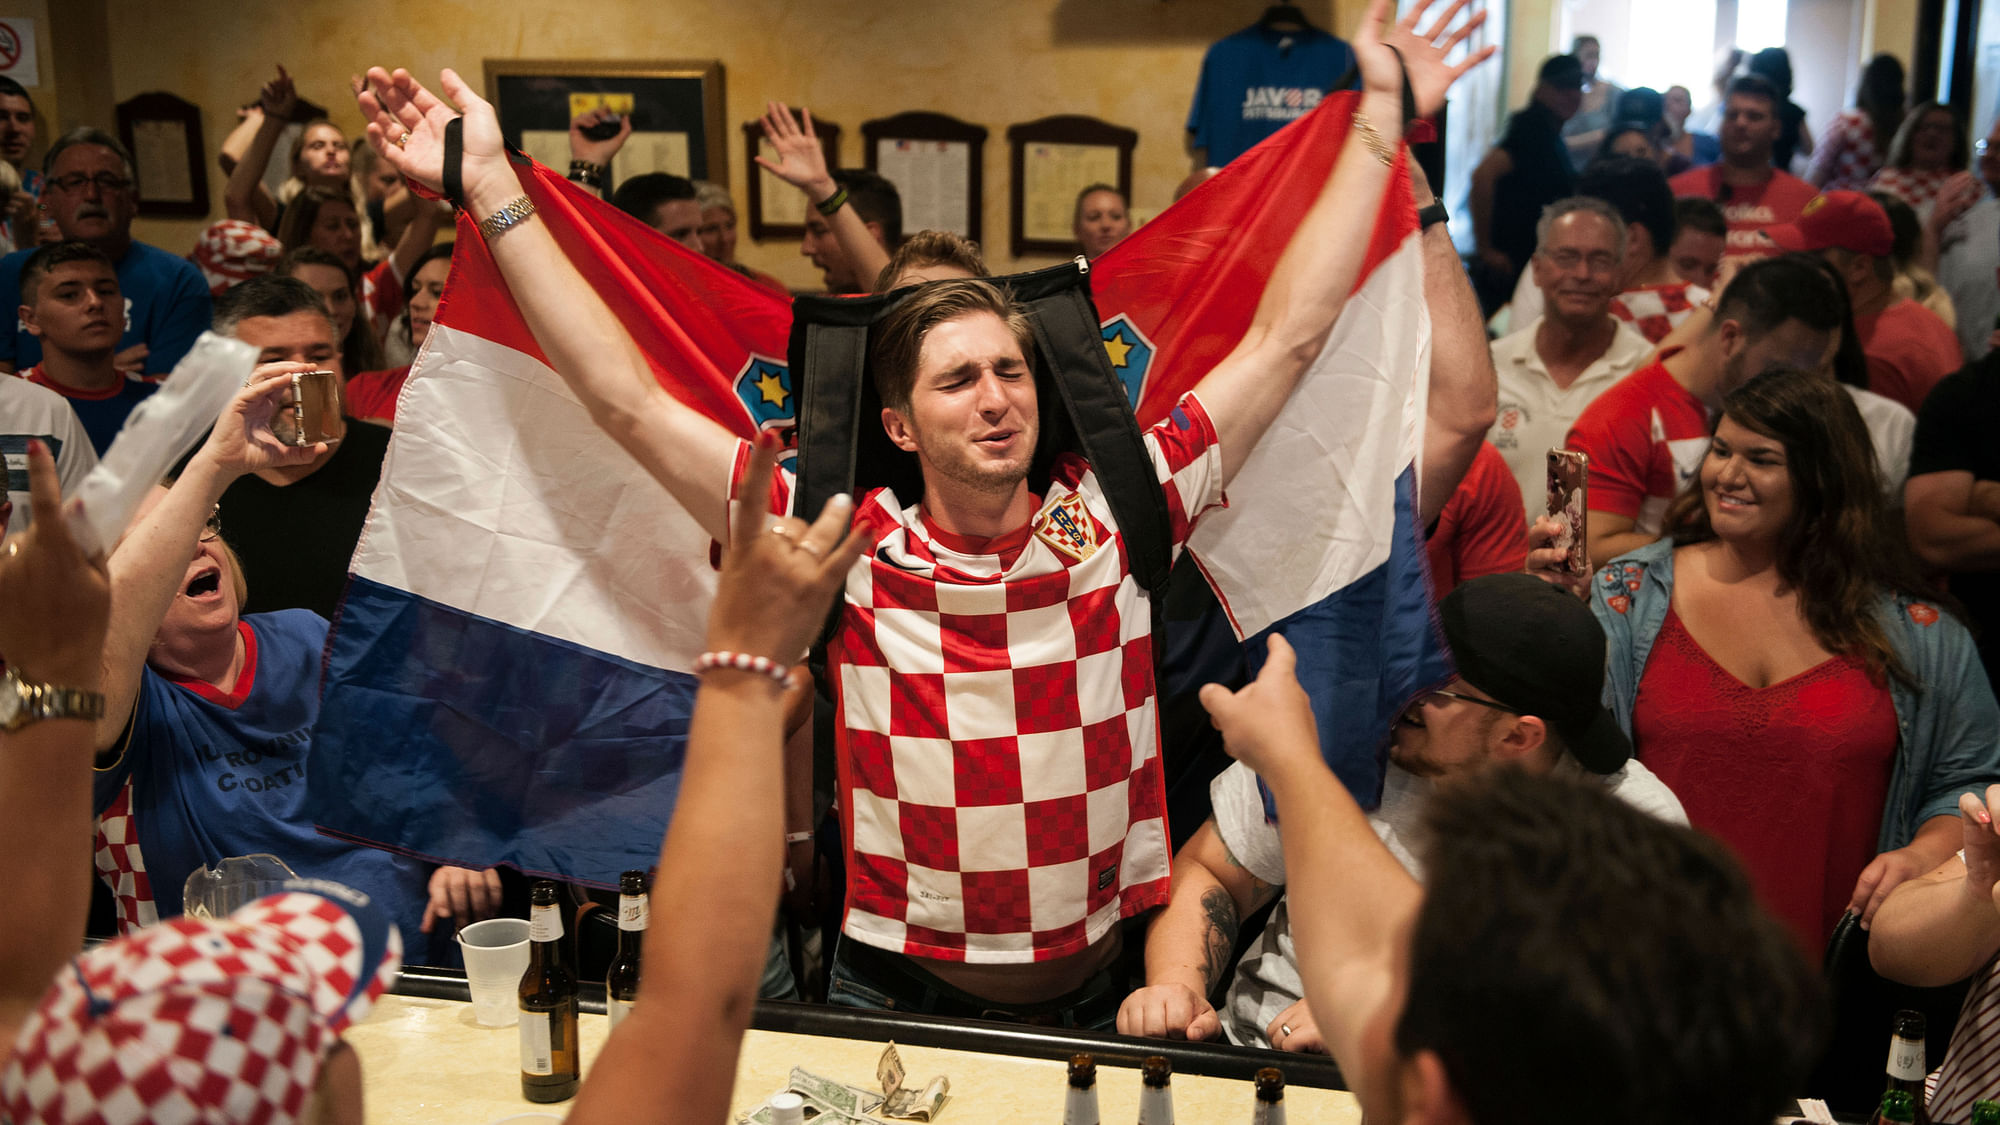 Marko Luketich Kochis, center, 26, of Cokeburg, raises the Croatian flag as he celebrates his team being in the World Cup final alongside other people of Croatian decent gathered to watch the game on Sunday, July 15, 2018.